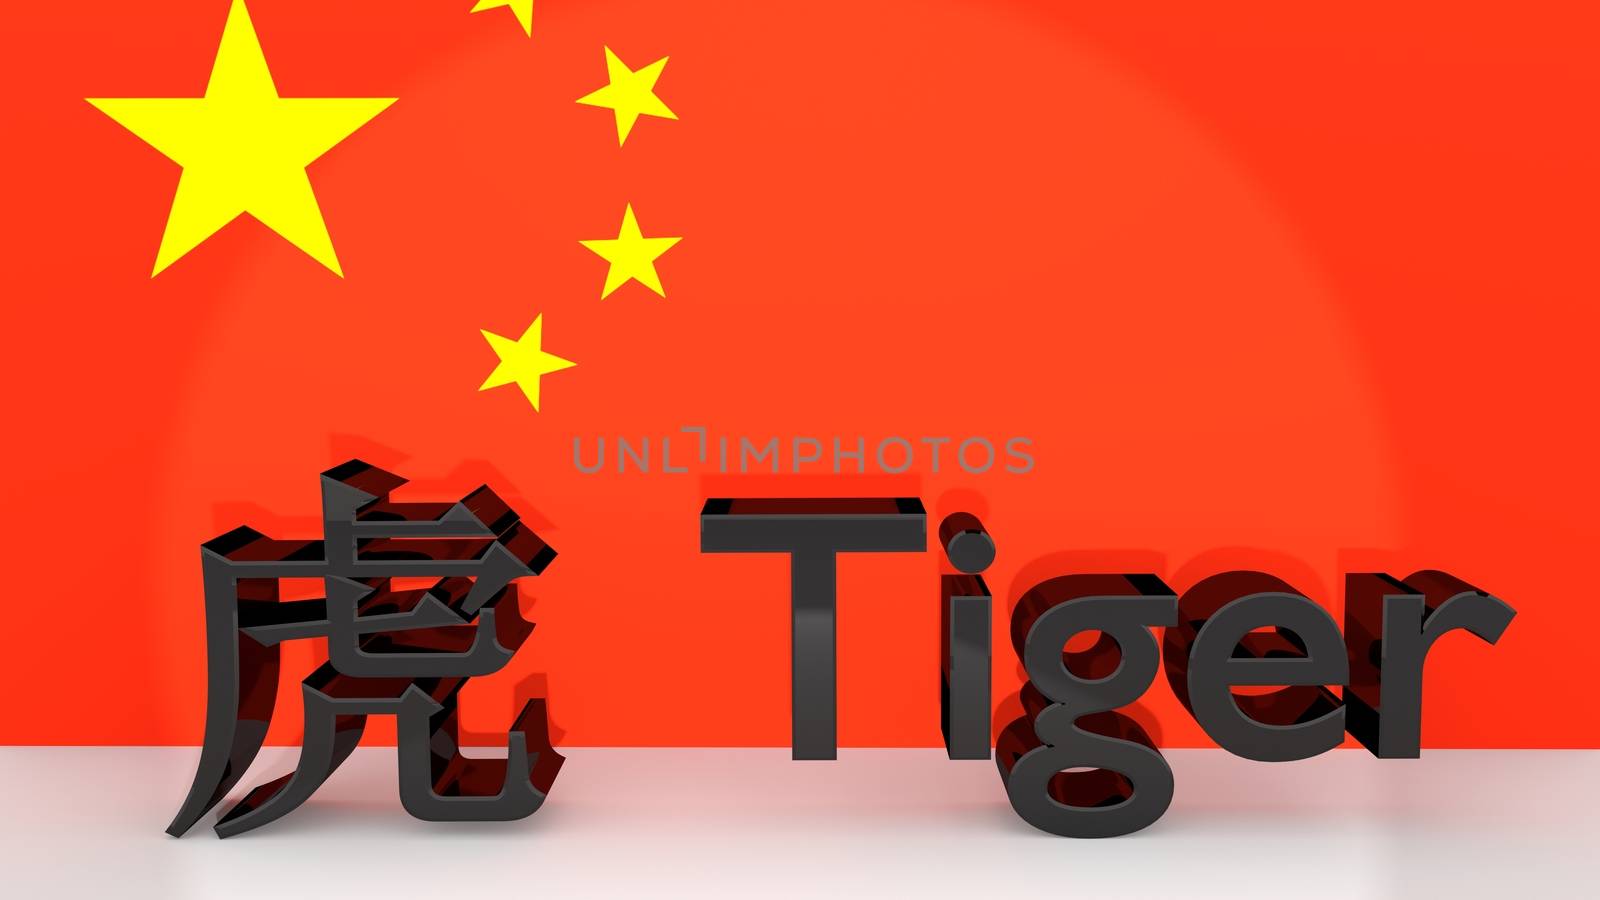 Chinese Zodiac Sign Tiger with translation by MarkDw